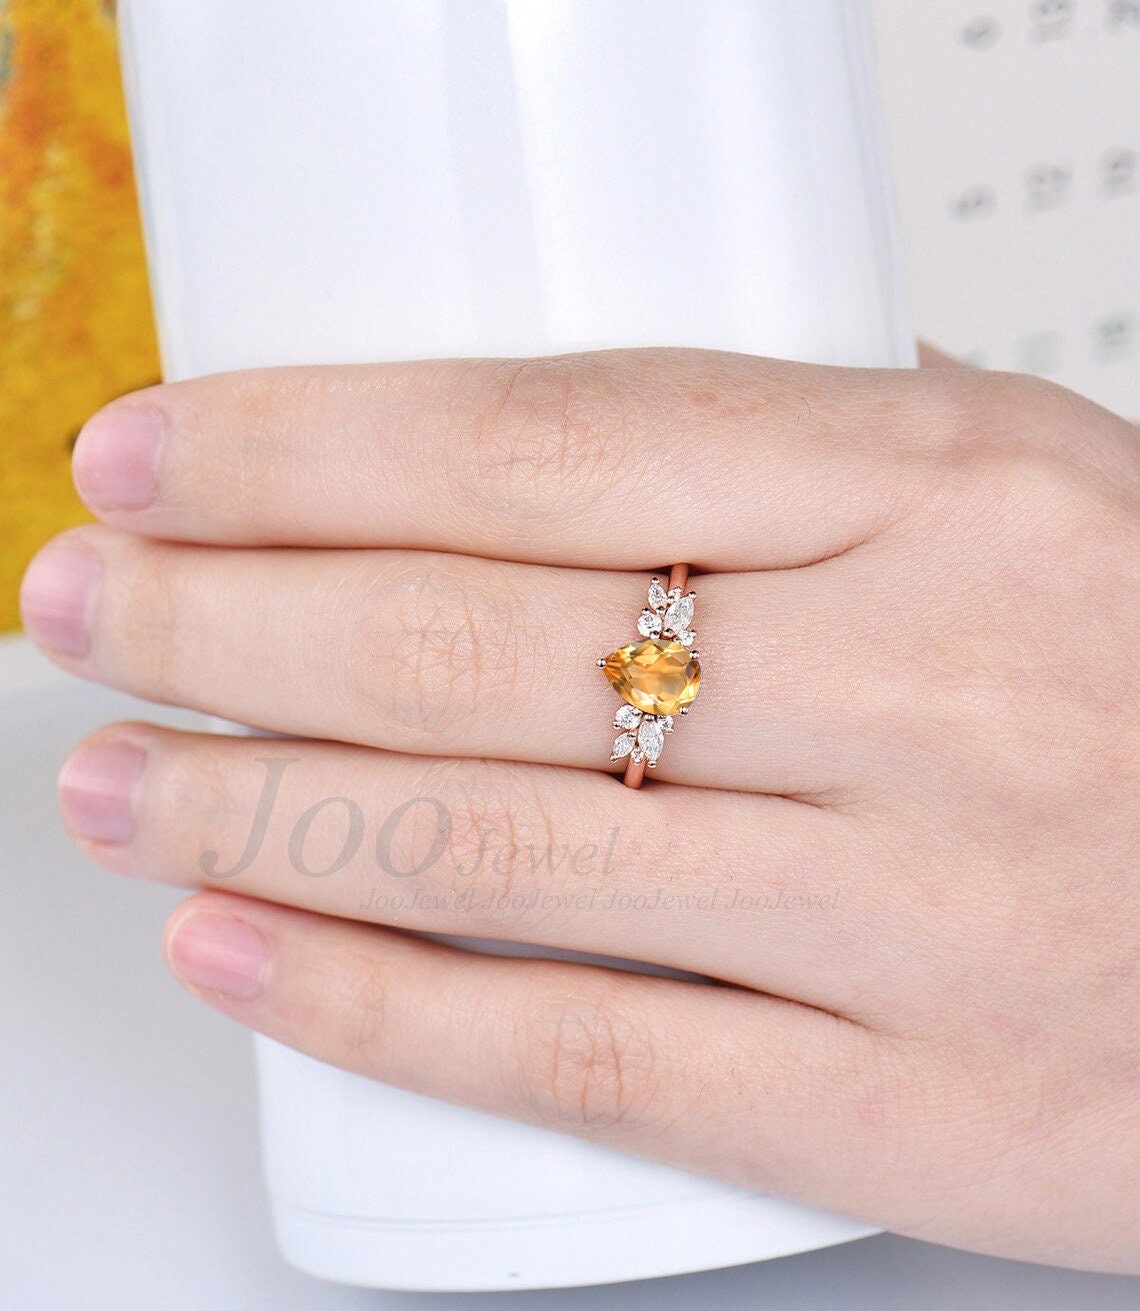 Natural Citrine Ring 1.25ct Pear Shaped Citrine Wedding Ring Sterling Silver Cluster Crystal Engagement Ring November Birthstone Jewelry